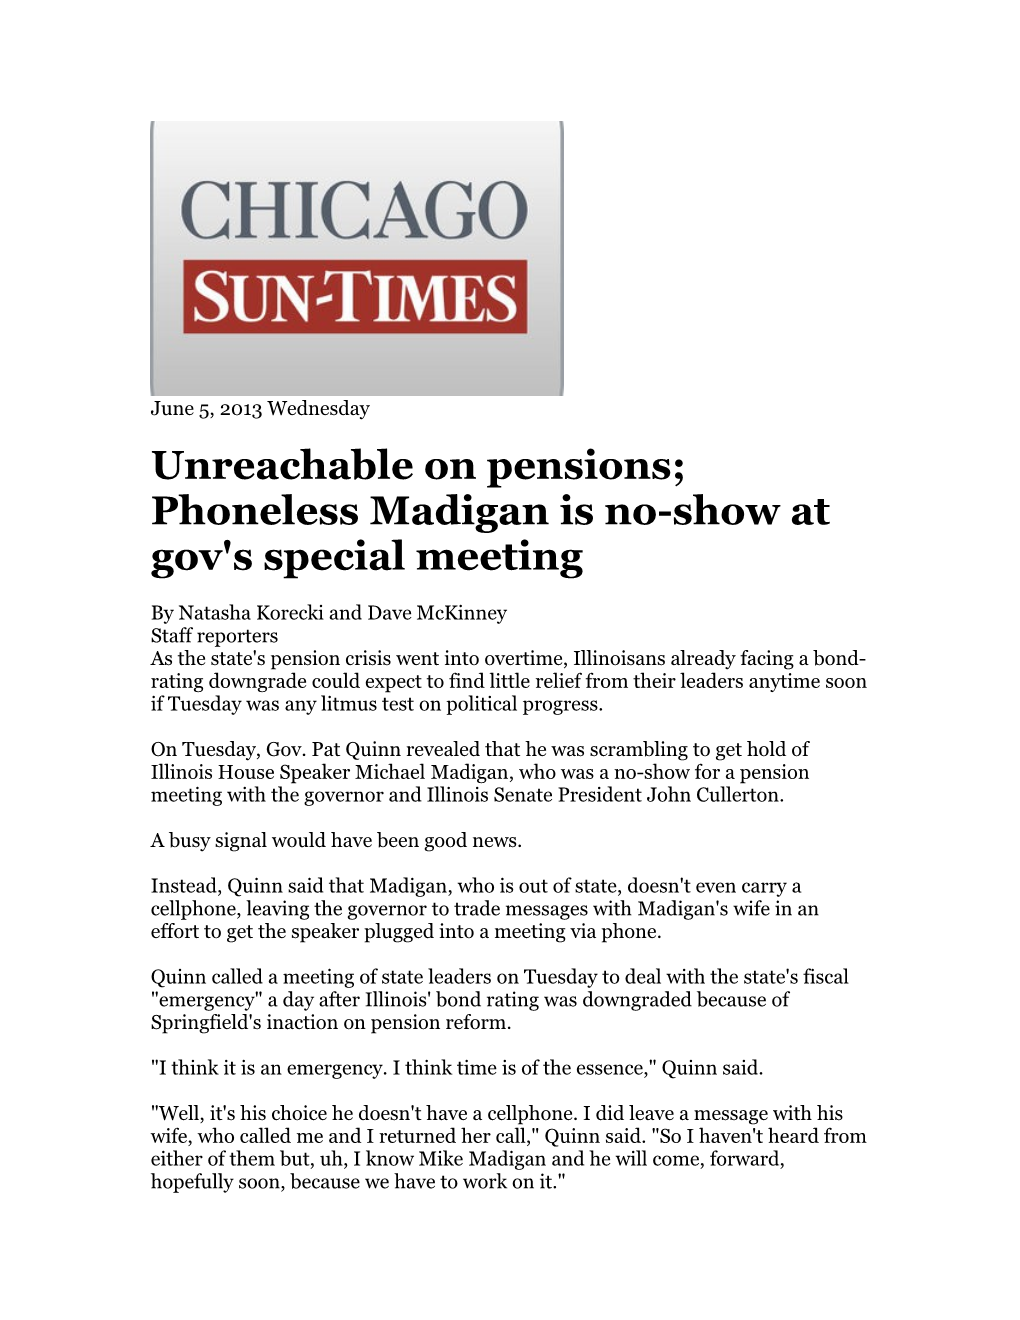 Unreachable on Pensions; Phoneless Madigan Is No-Show at Gov's Special Meeting